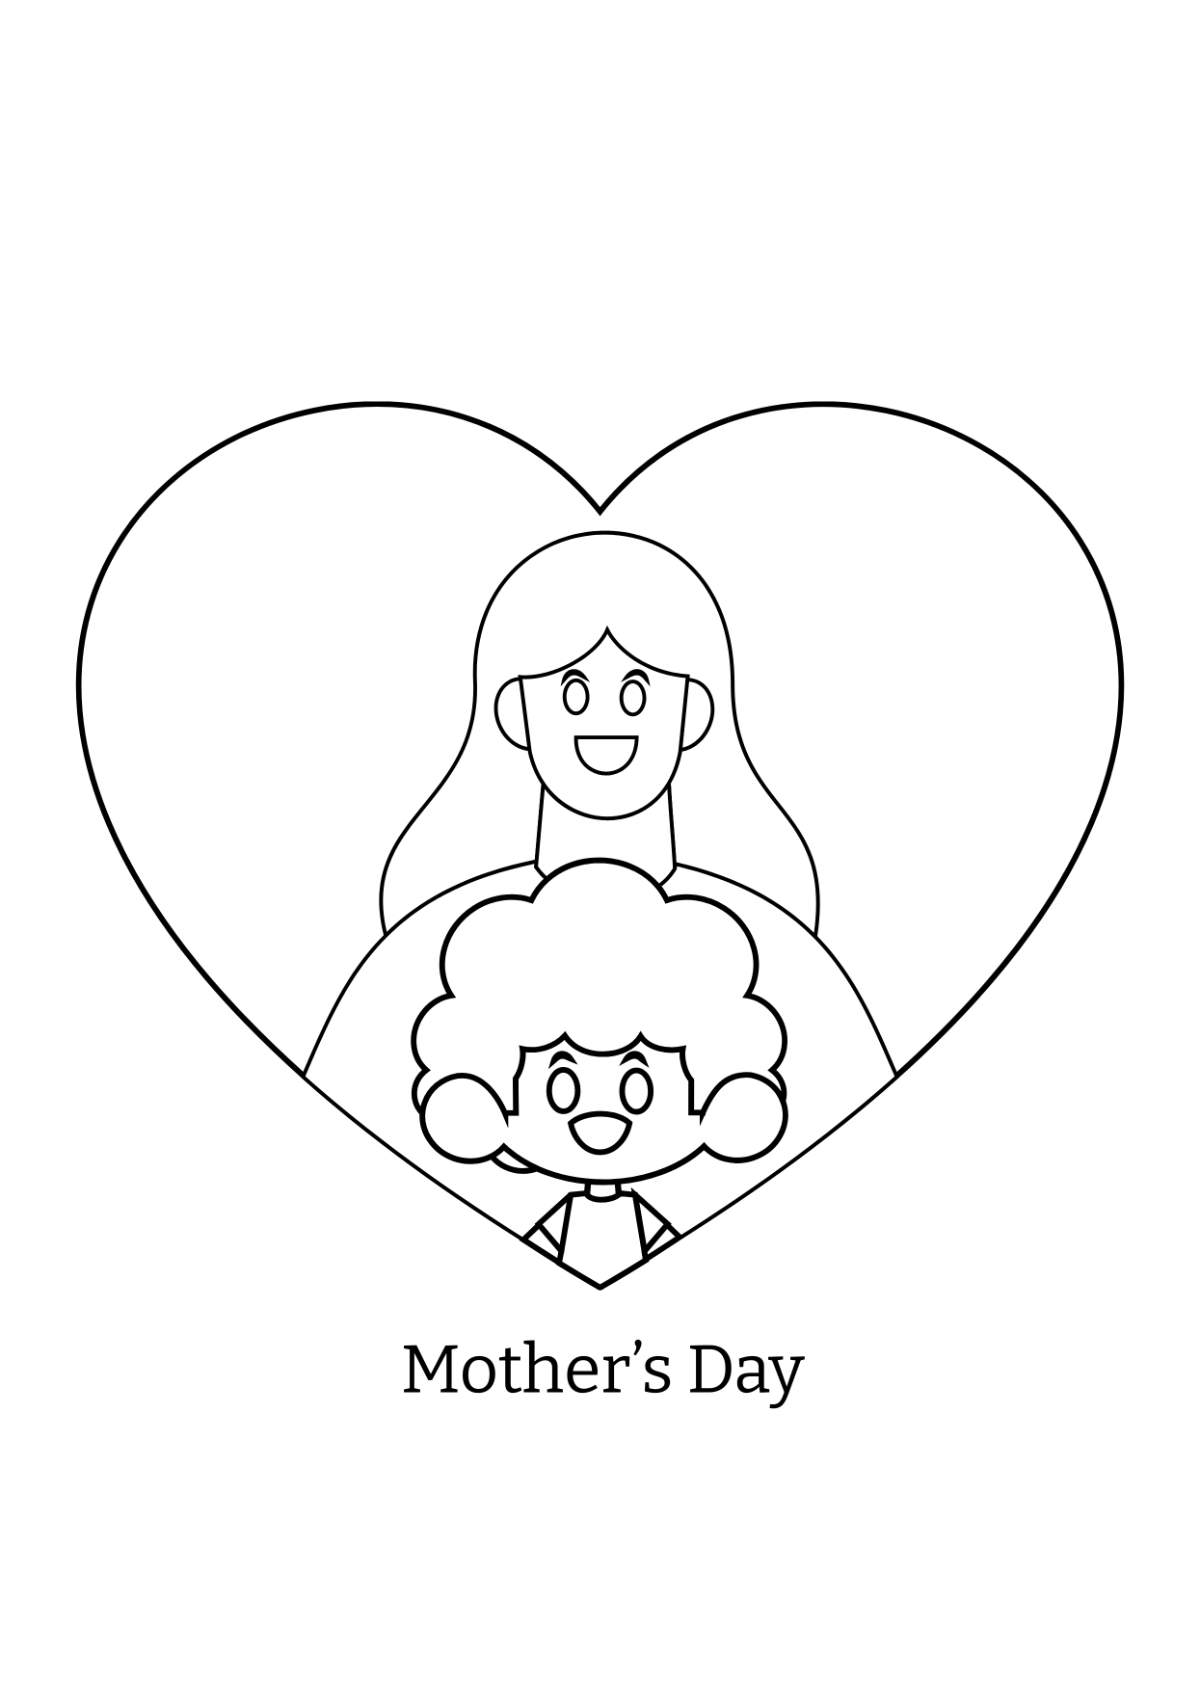 Mother's Day Card Drawing